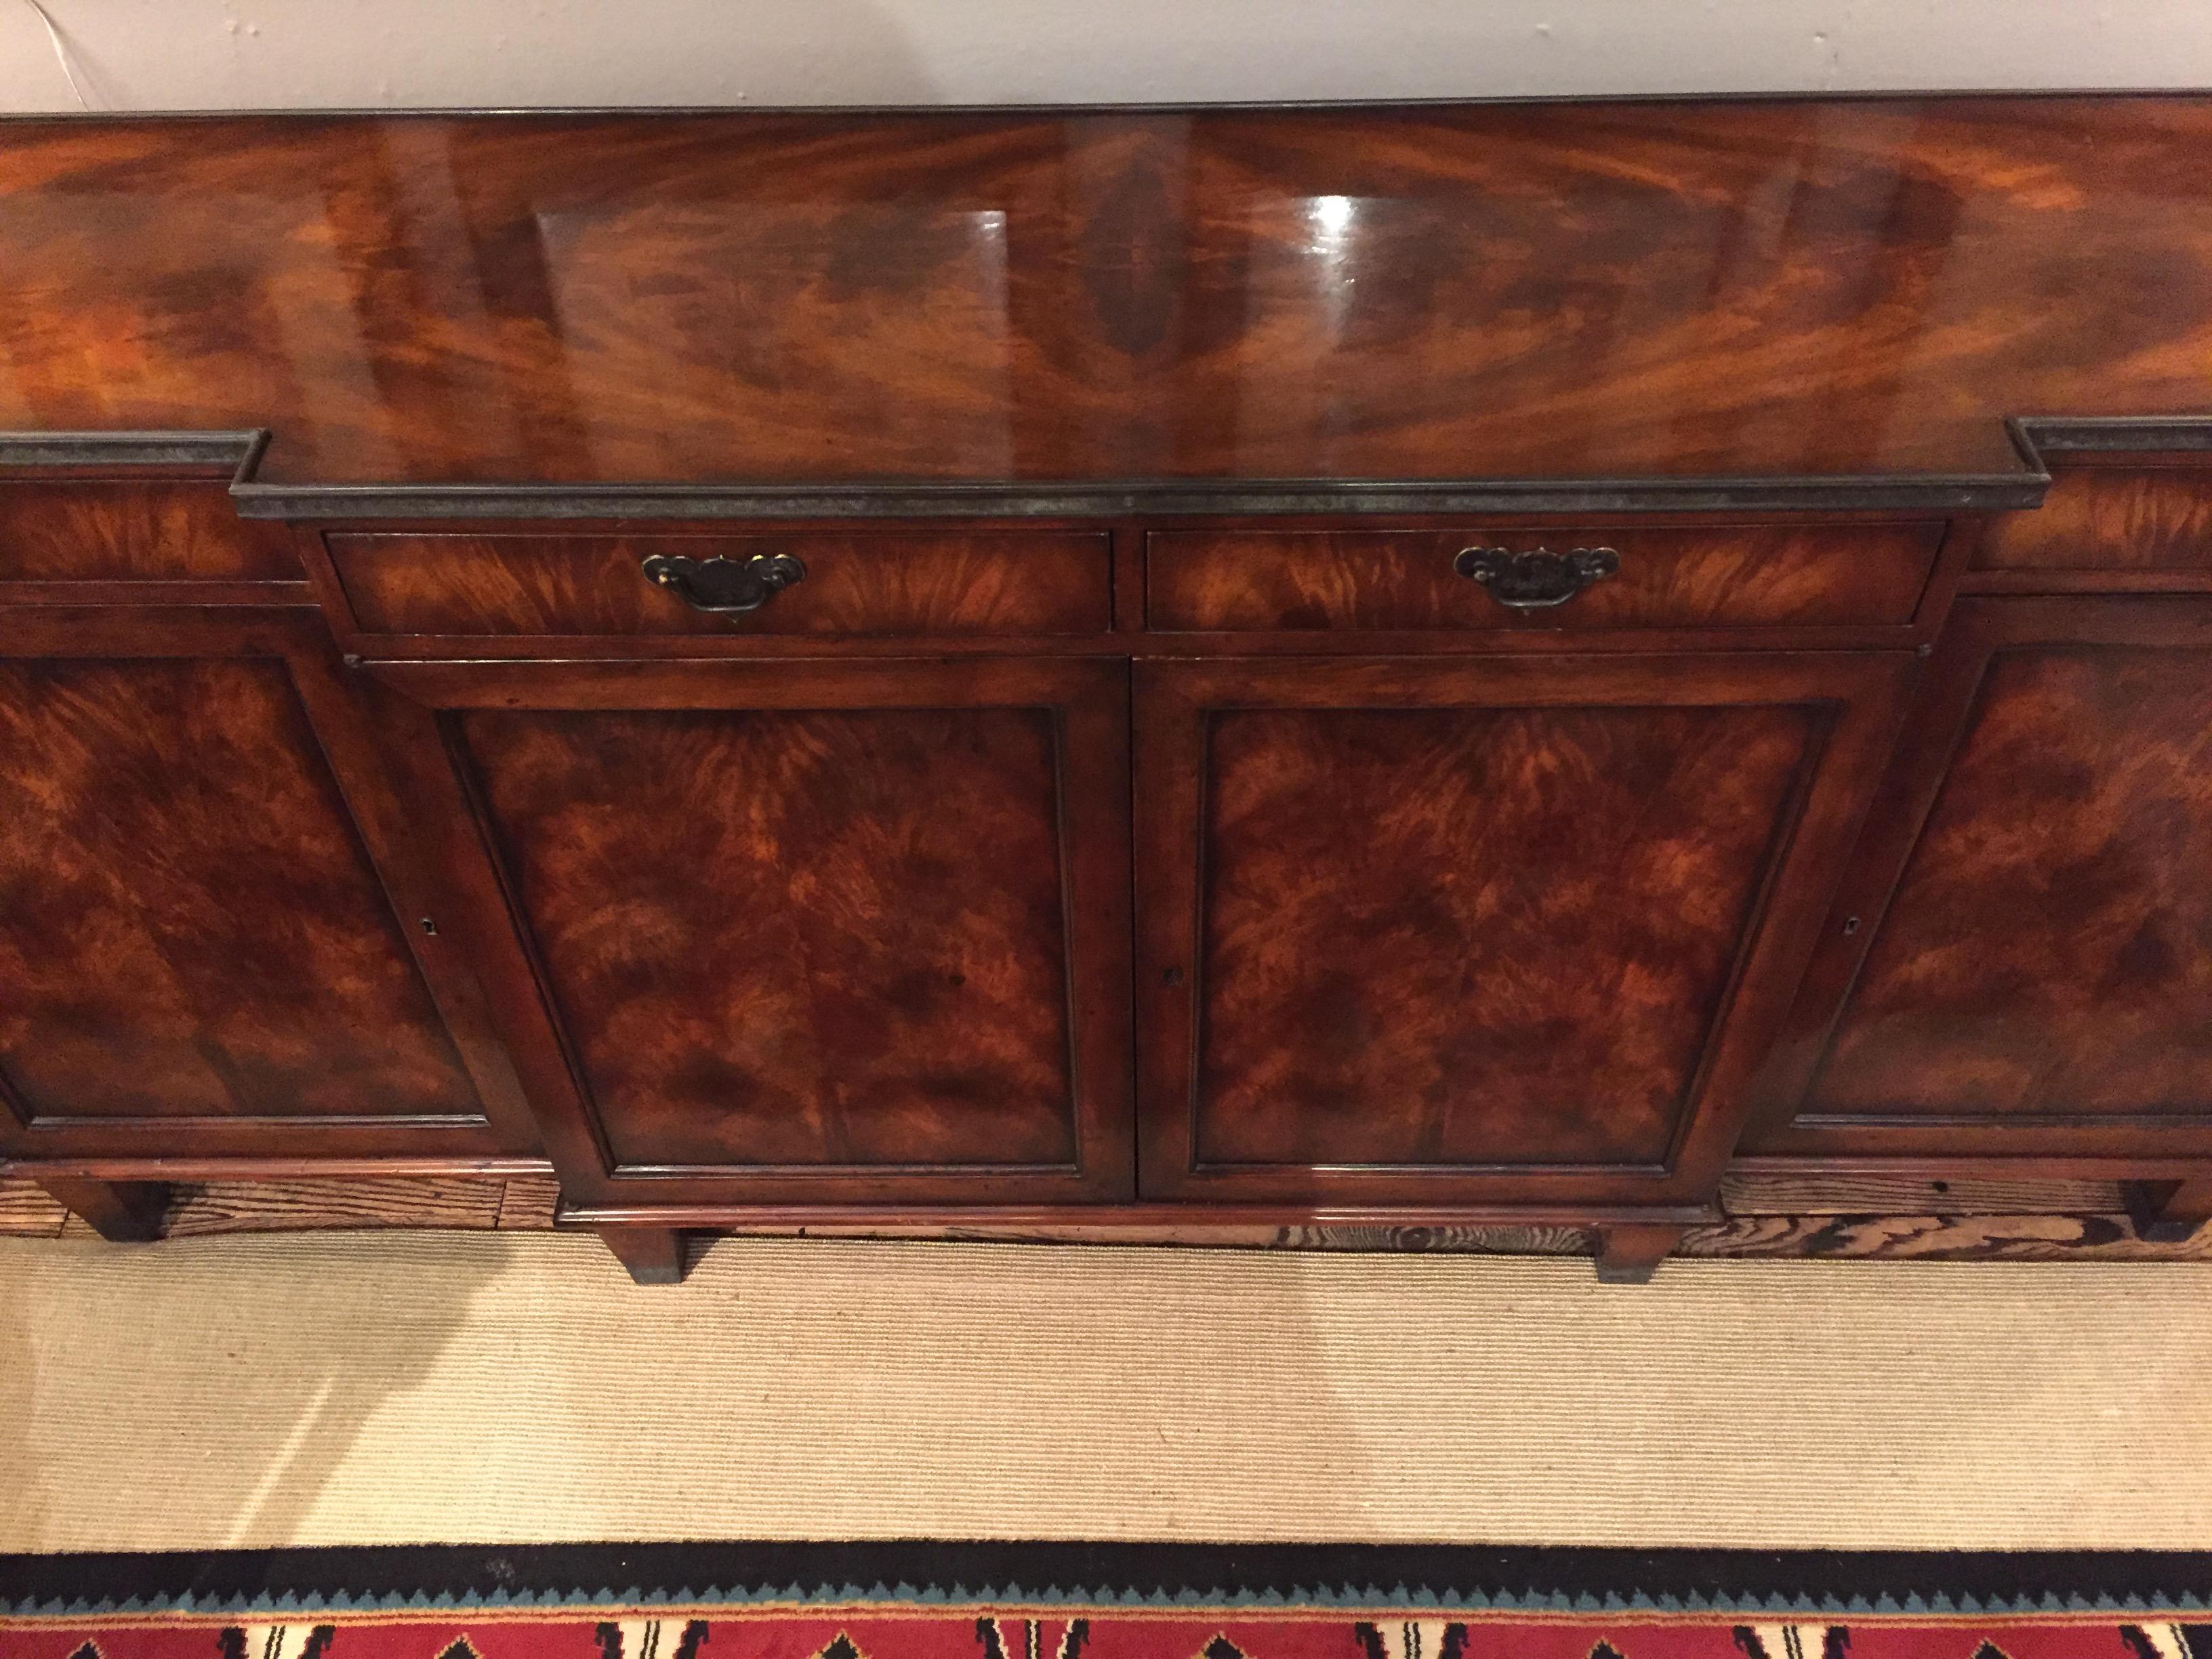 Gorgeous and very large designer sideboard having wonderful grain, bronze gallery around the top, and lots of storage inside with 4 drawers and 4 paneled doors.

Depth center part 18
Depth side sections 16.